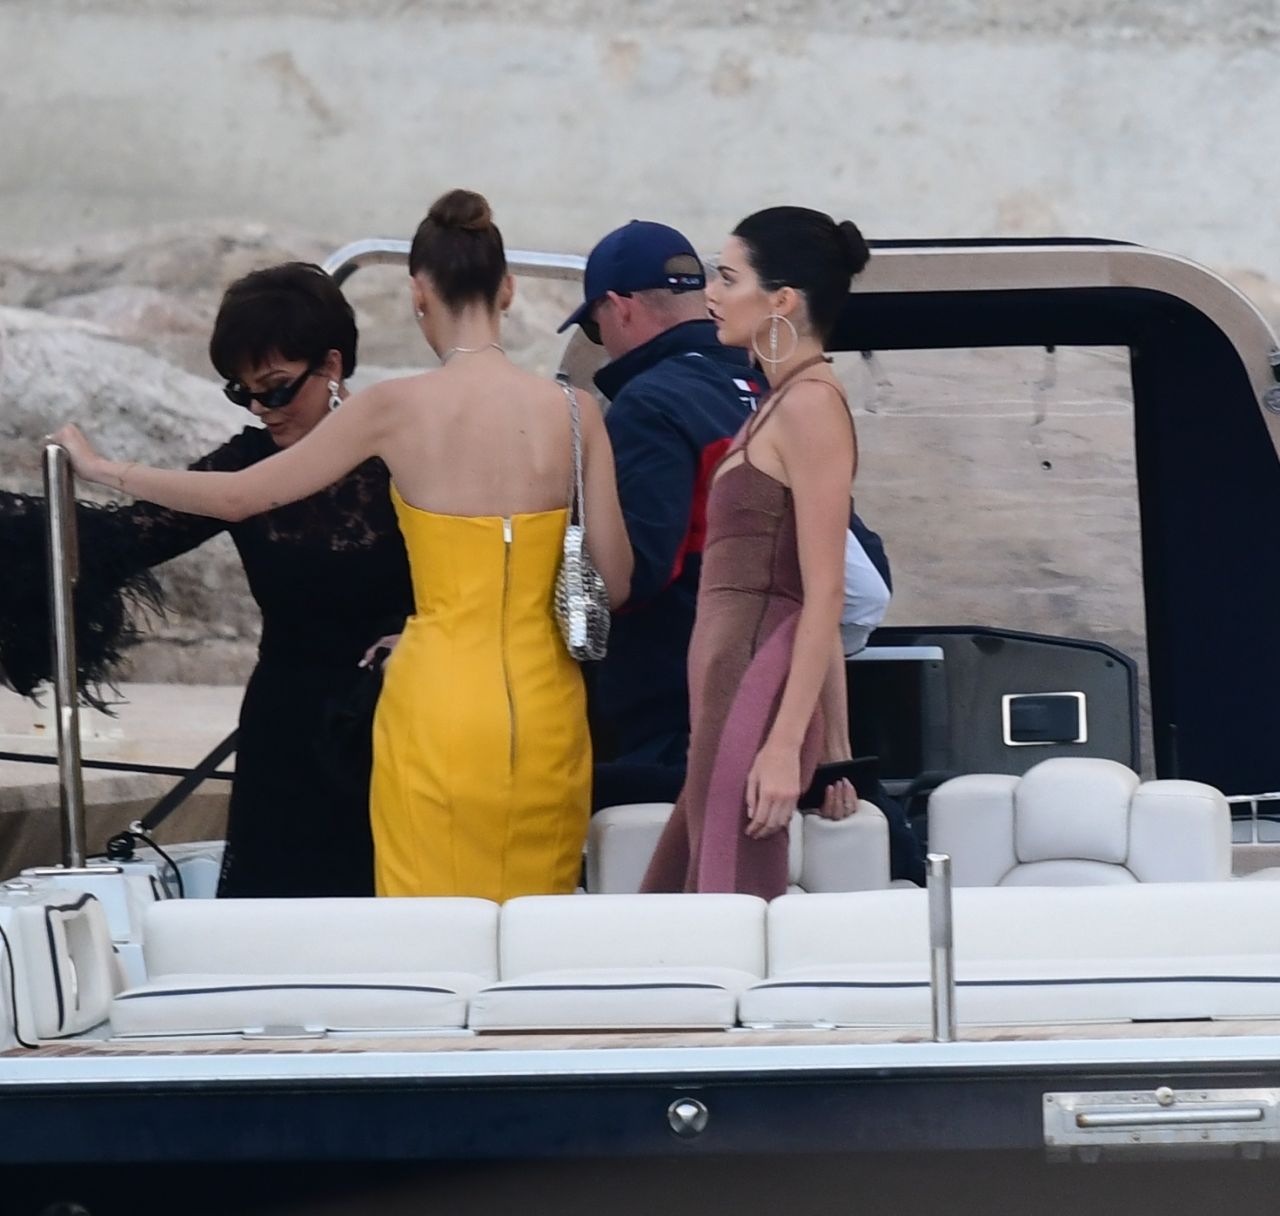 bella-hadid-and-kendall-jenner-tommy-hilfigers-yacht-in-monaco-05-25-2019-18.jpg